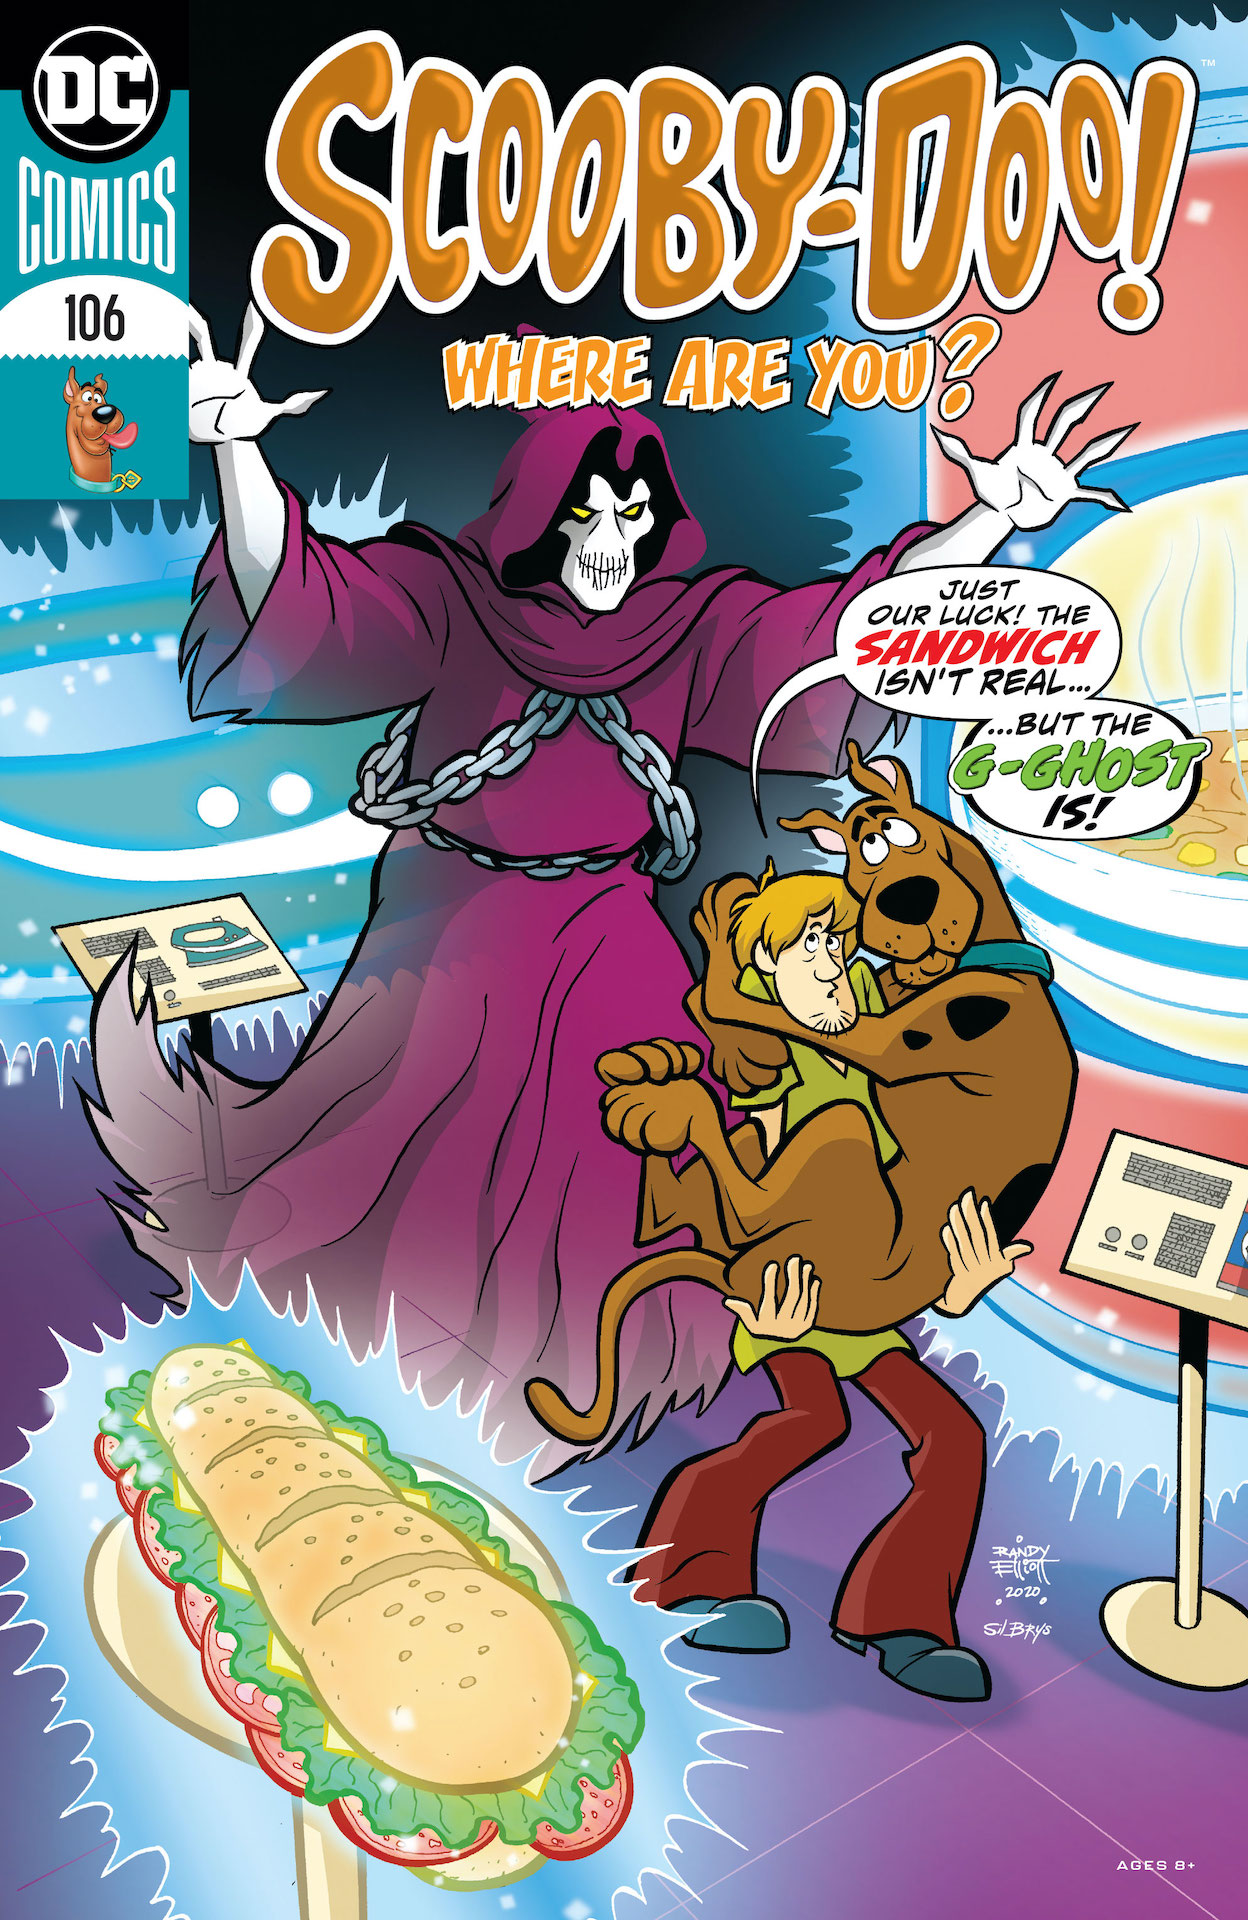 DC Preview: Scooby-Doo, Where Are You? #106